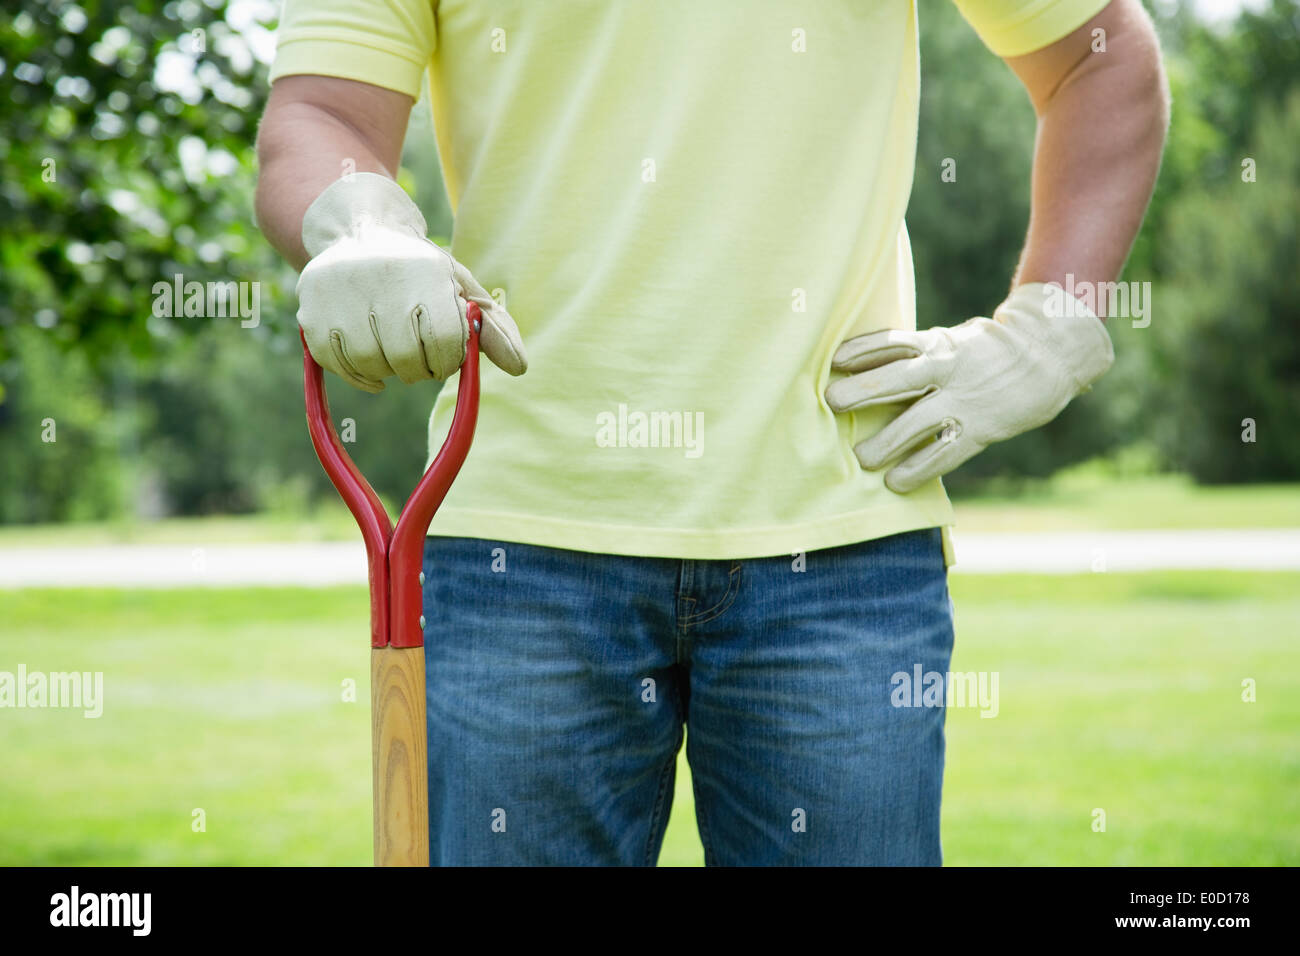 man with gardening tool standing in back yard Stock Photo